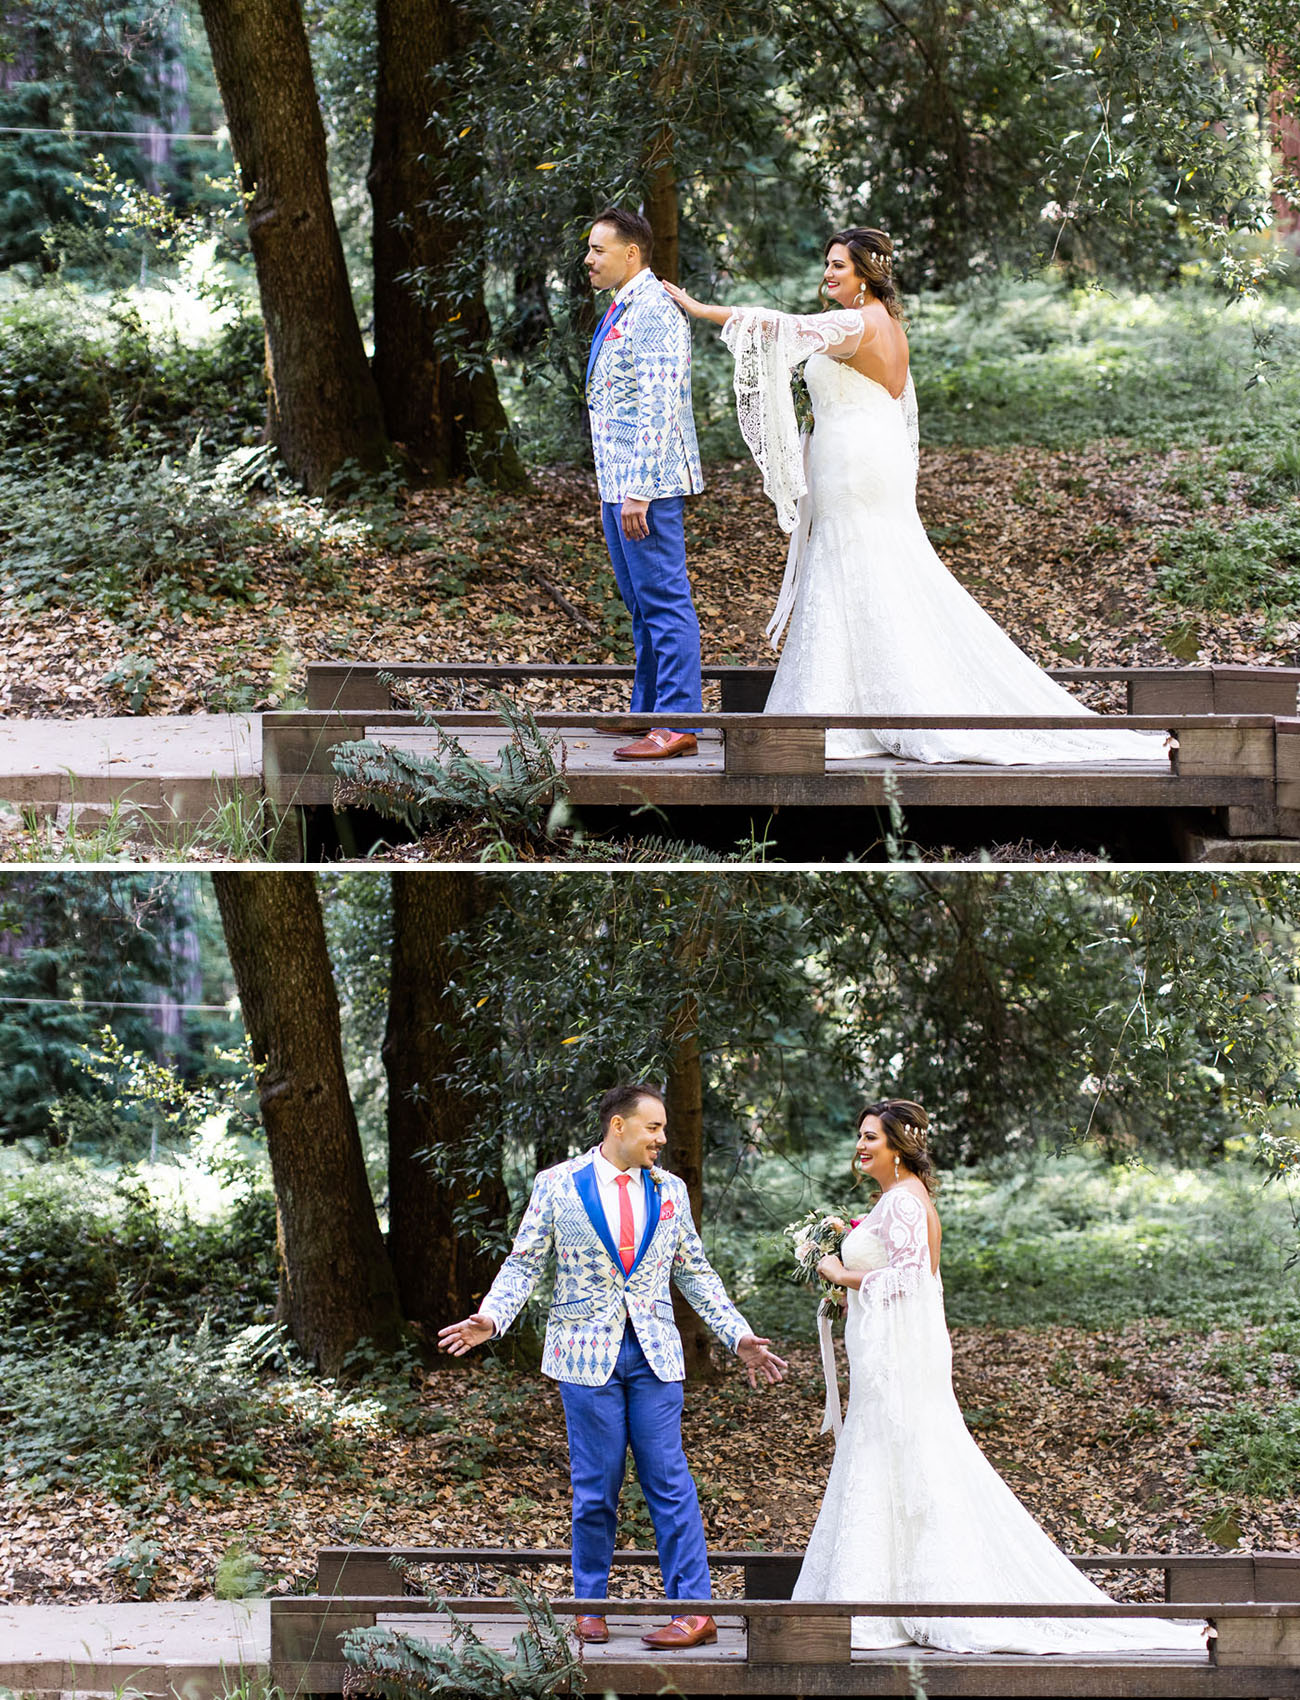 The groom was wearing a bright cobalt suit with a red tie and a colorful and printed blazer